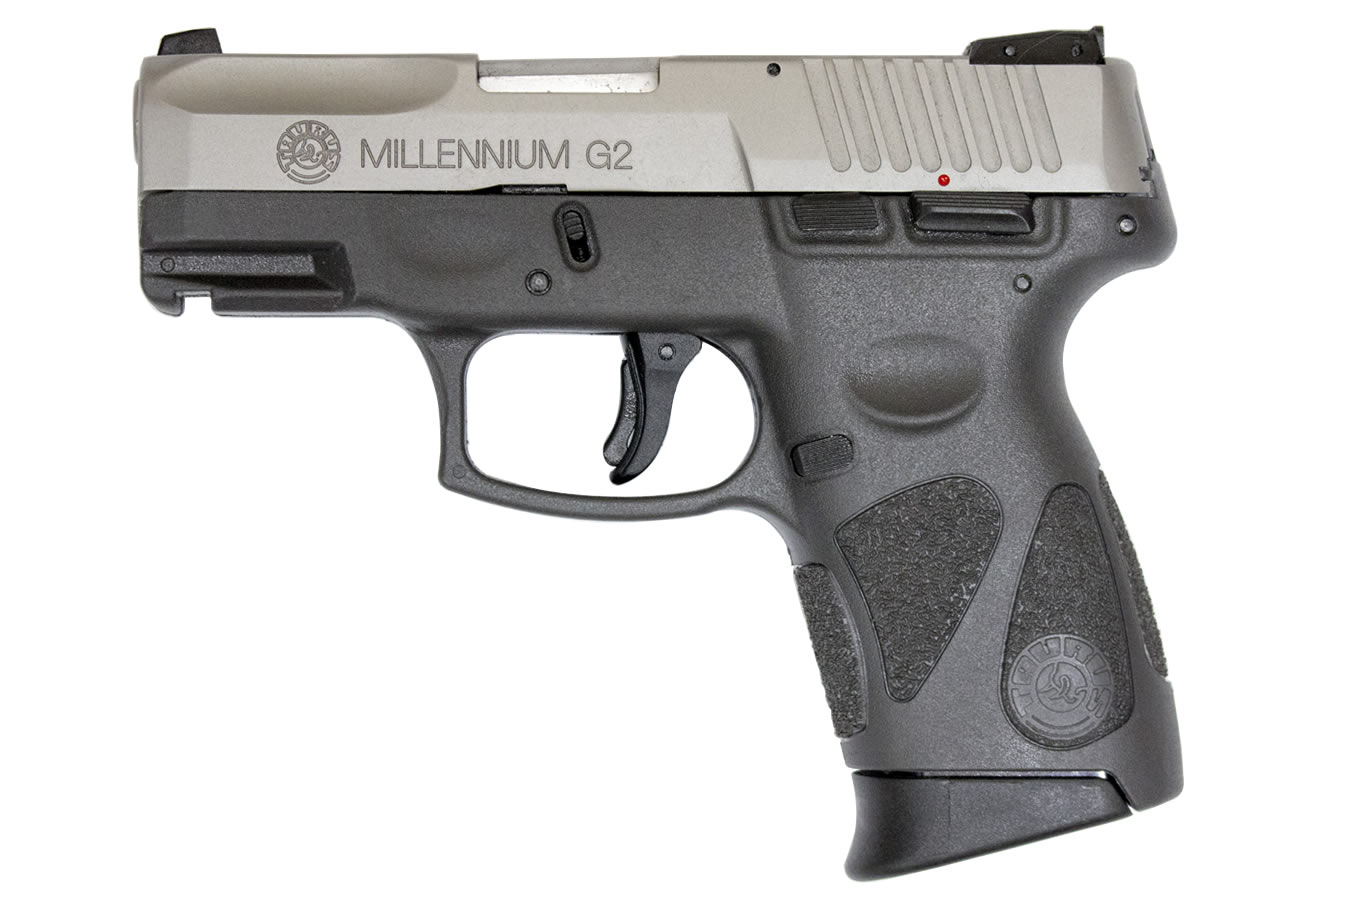 taurus-pt140-millennium-g2-40-s-w-pistol-with-stainless-slide-and-gray